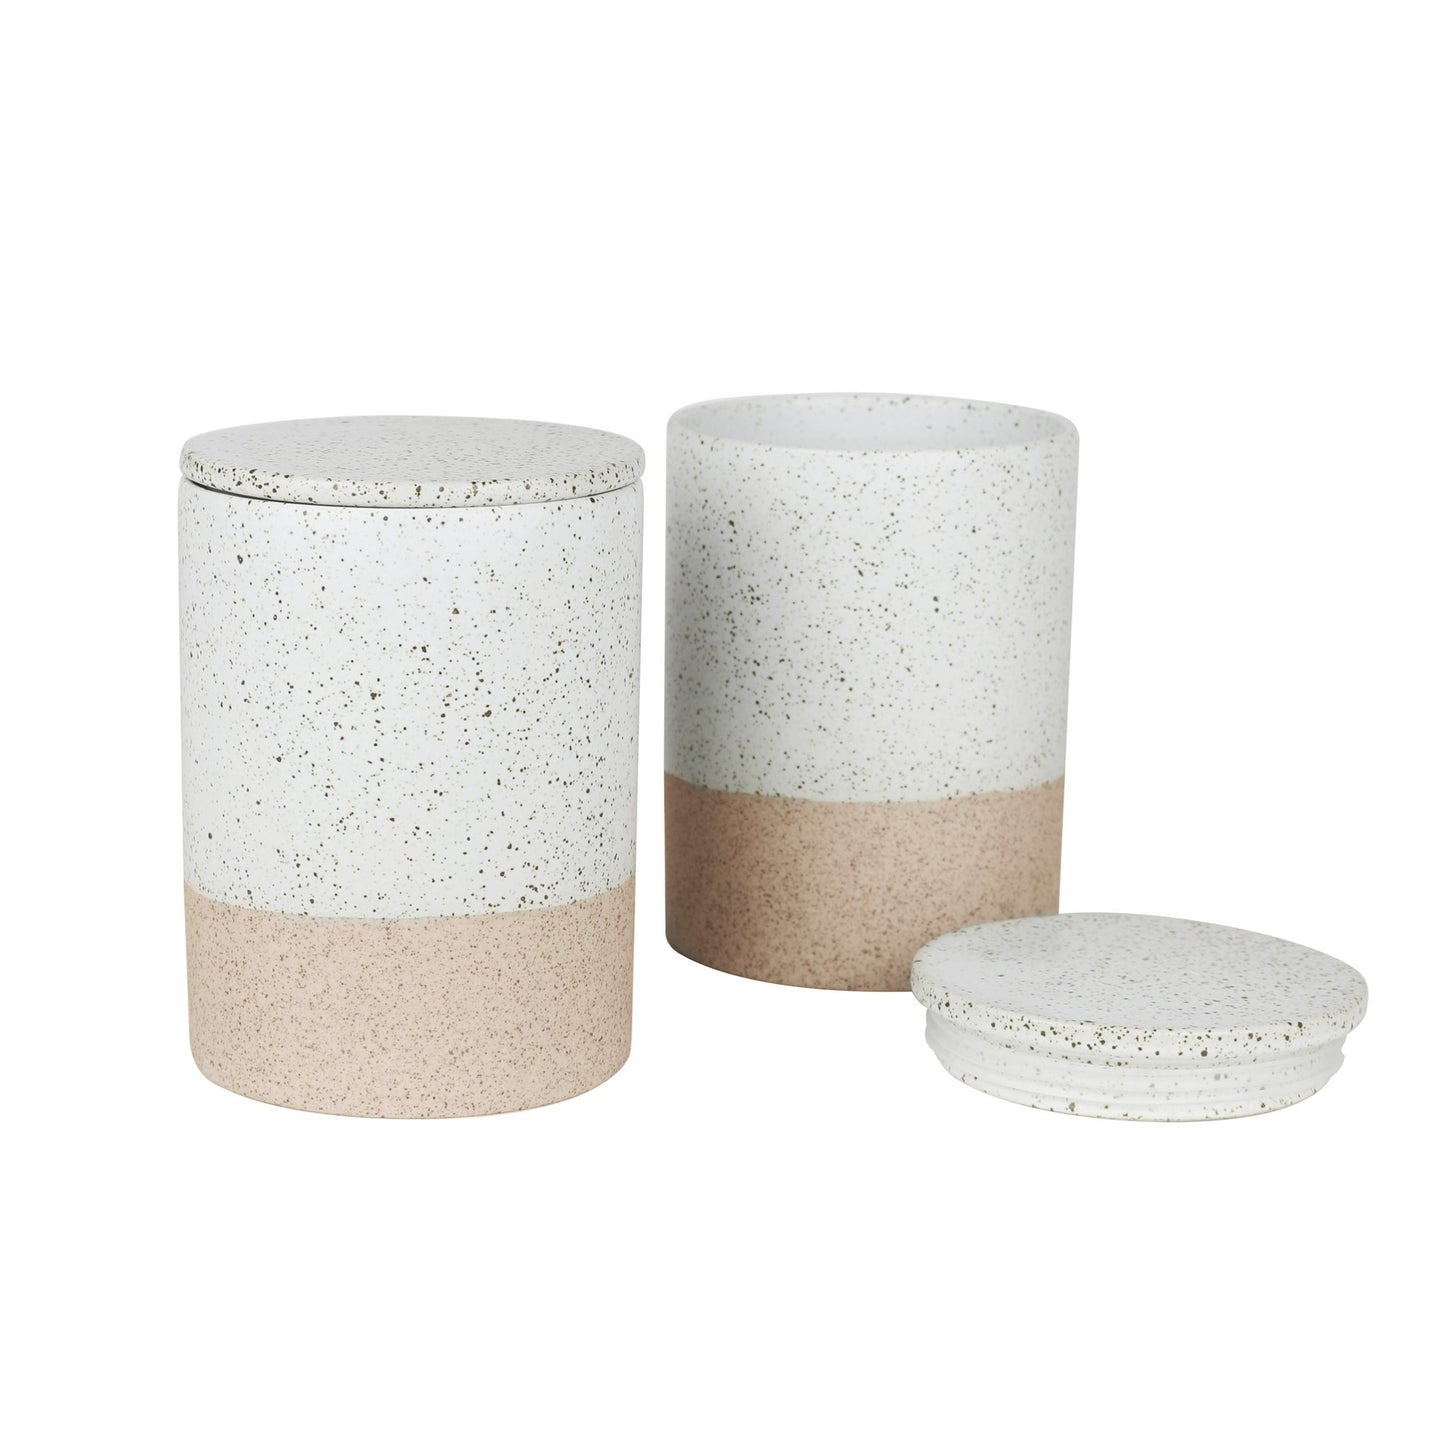 RG Canisters Garden to Table - Set 2